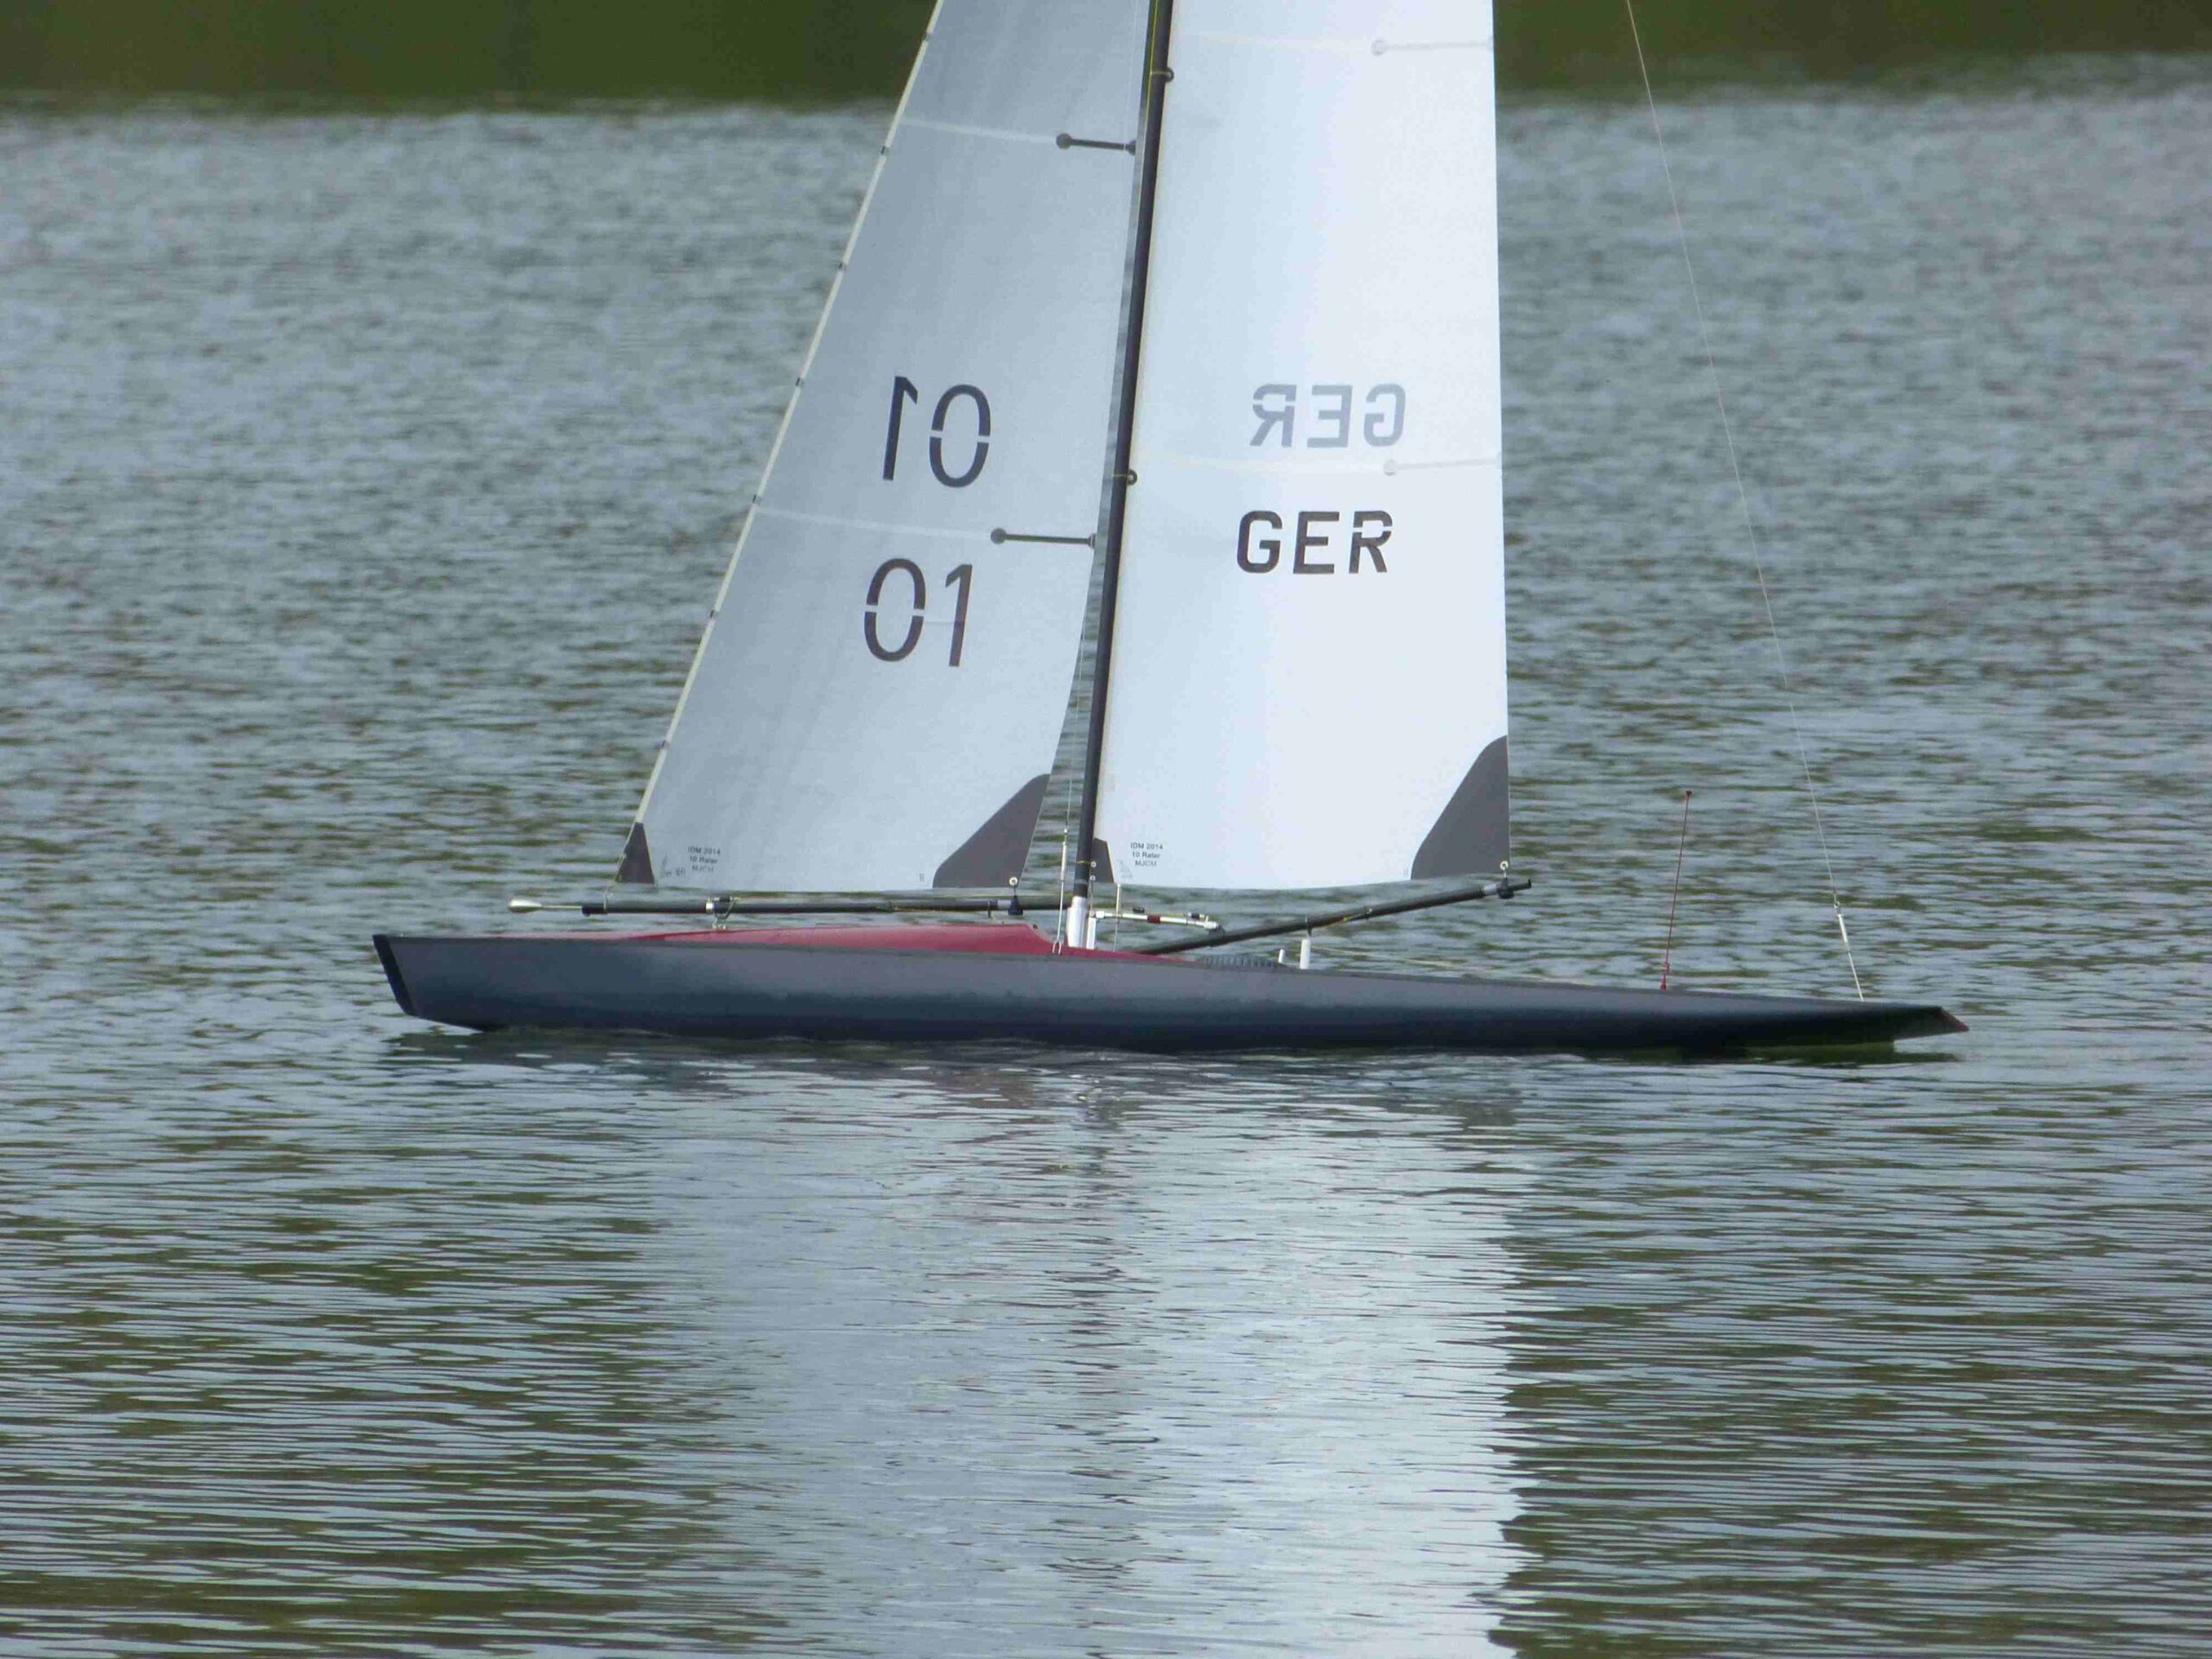 10 Rater Rc Yacht Design